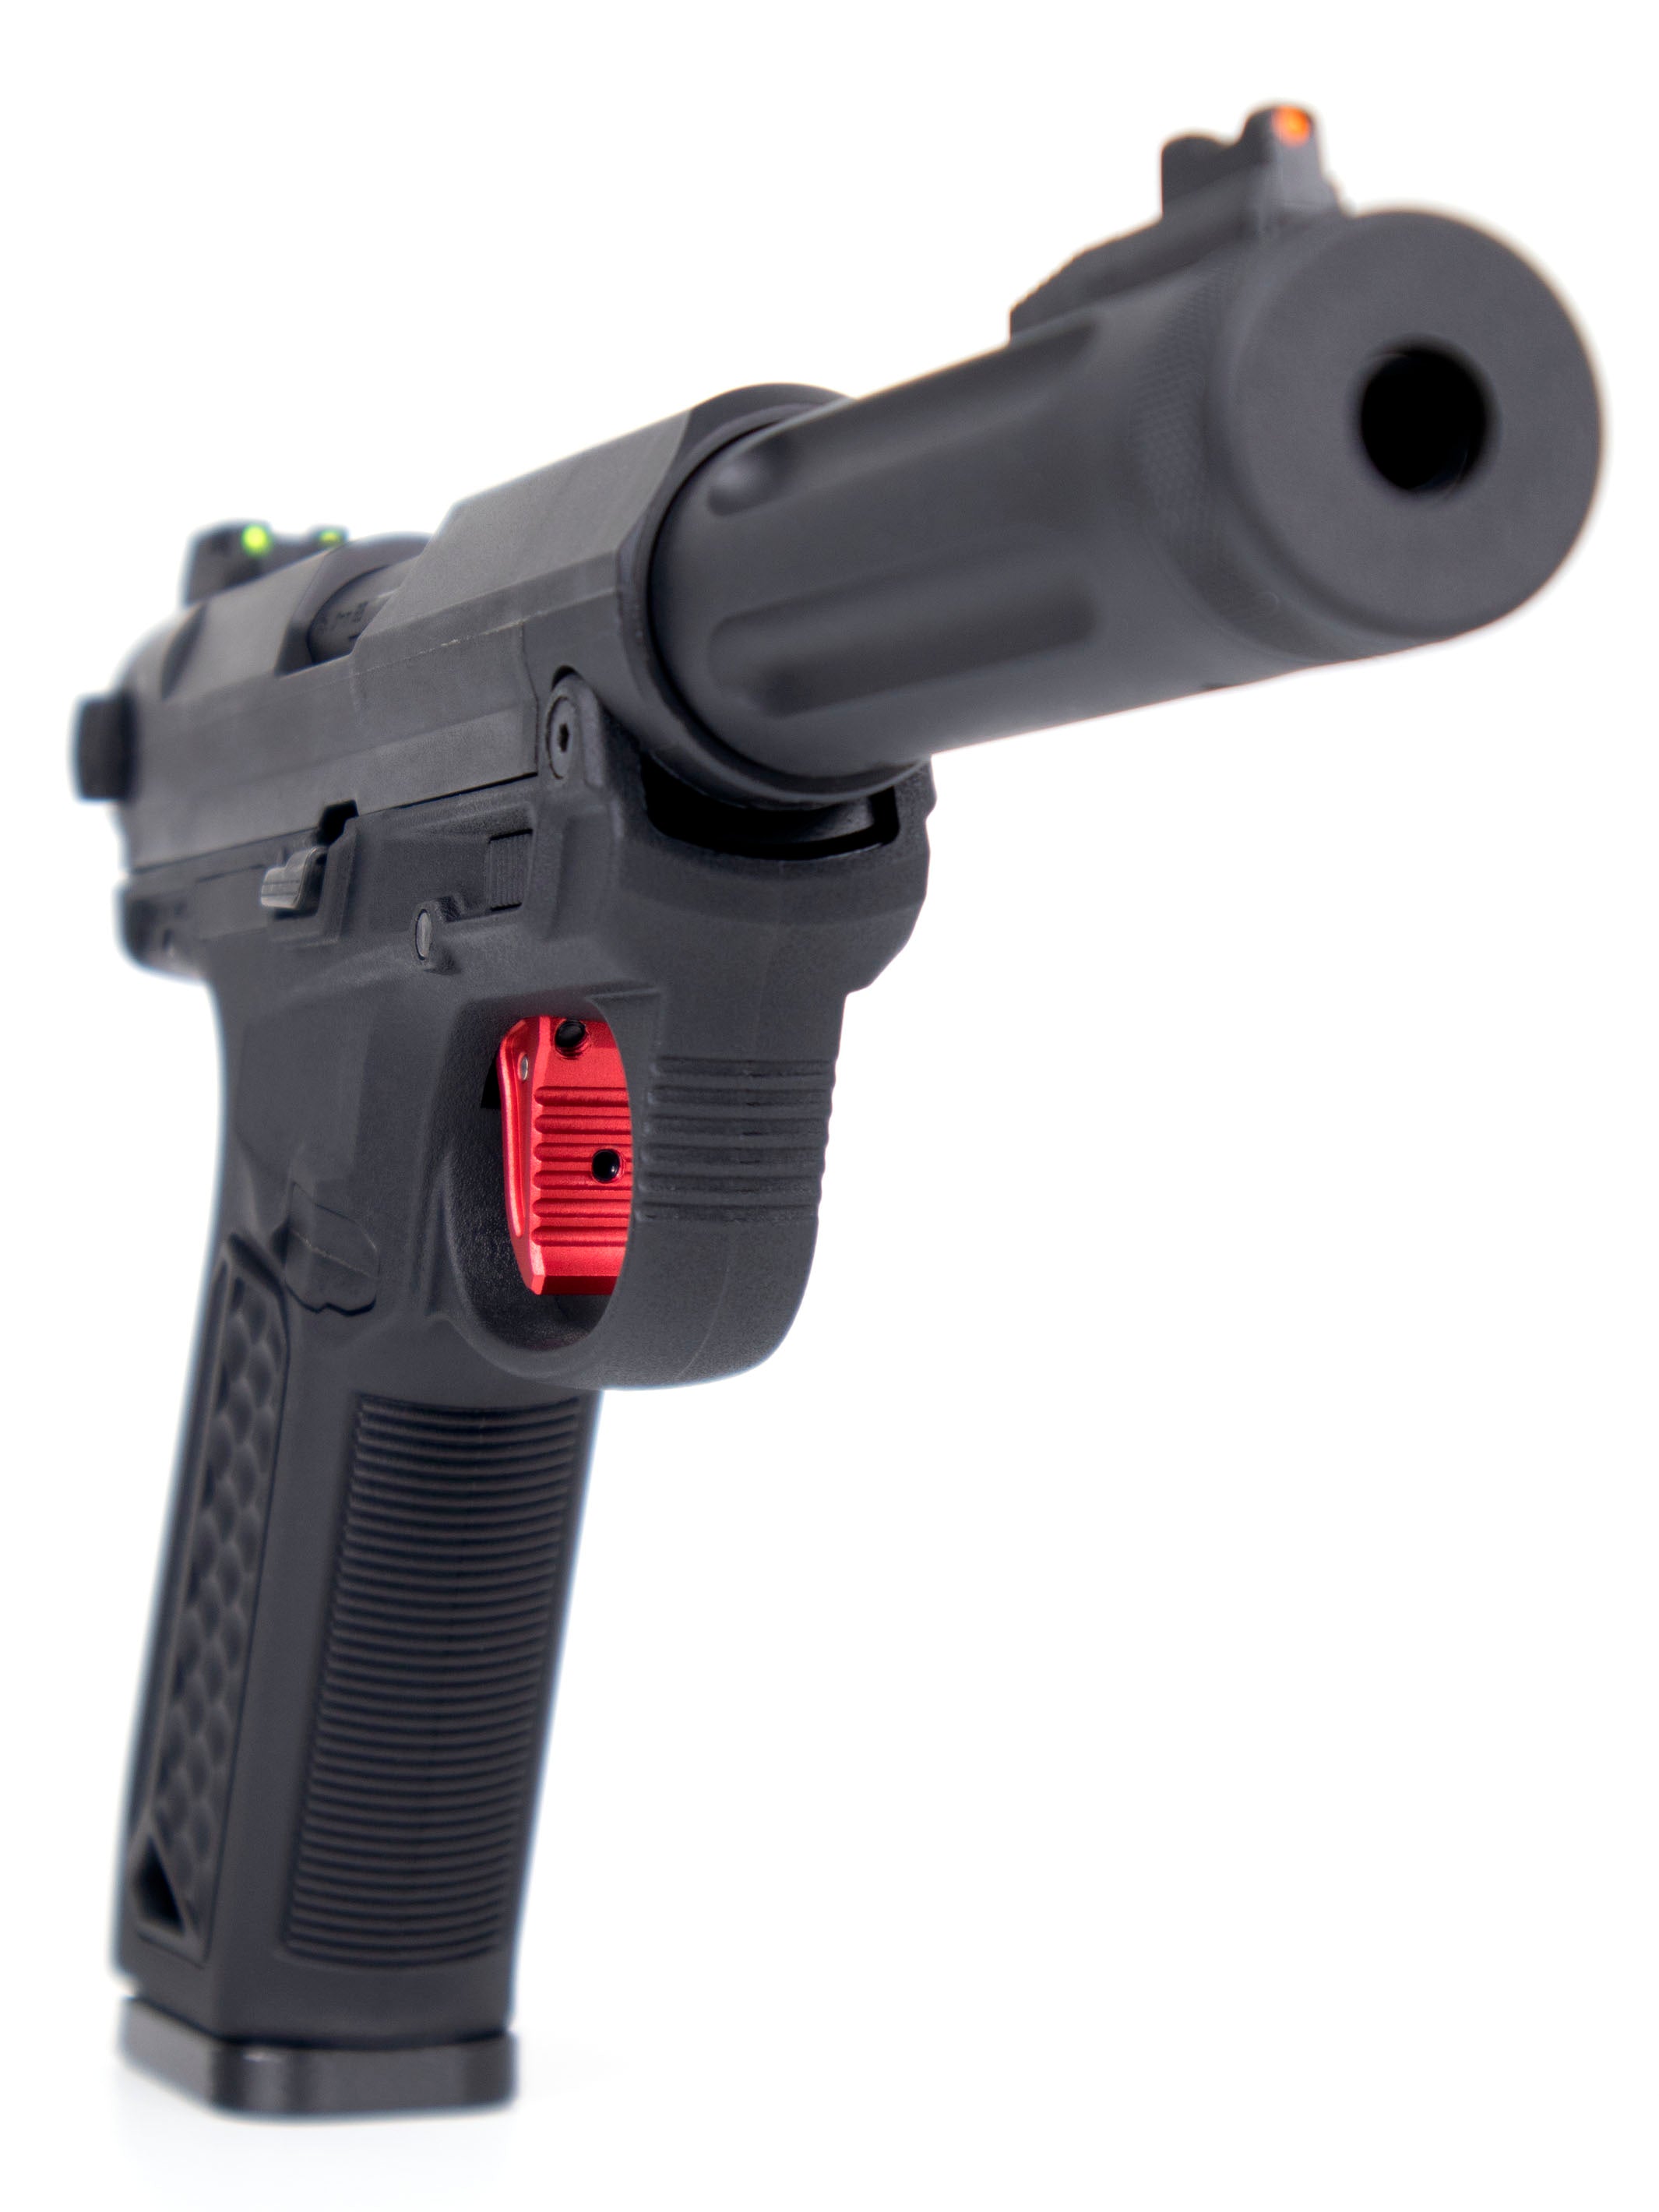 aap-01 aftermarket trigger in red color#color_red